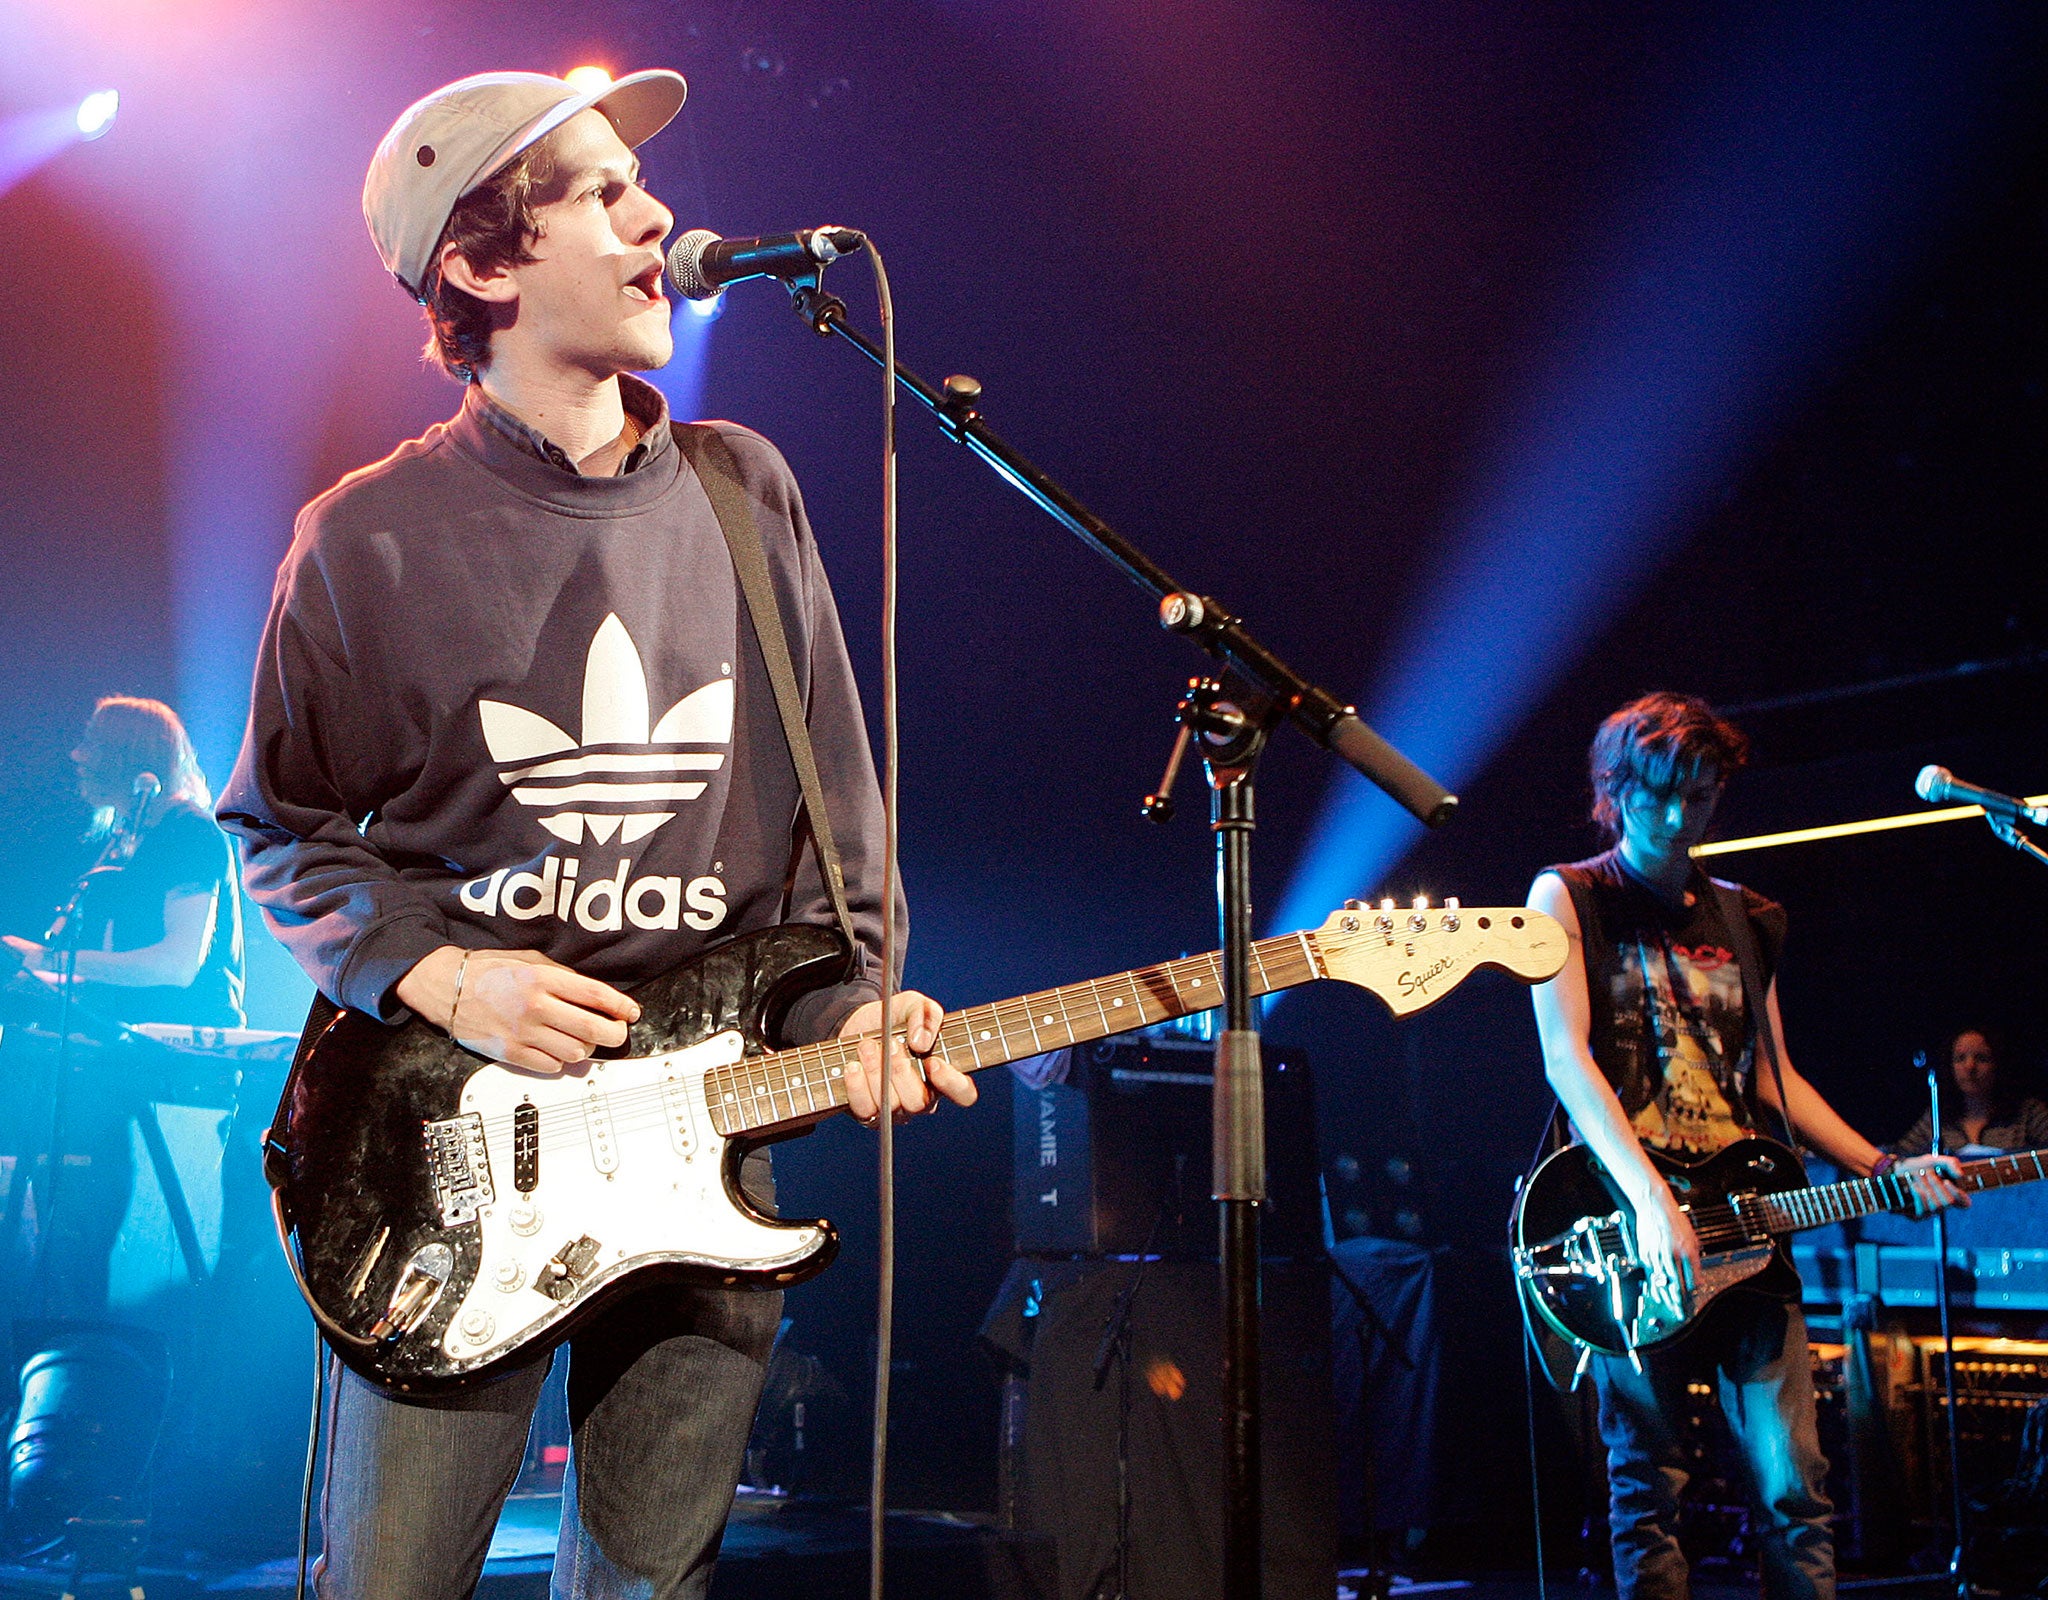 Jamie T plays live in 2007 before going on hiatus from 2010